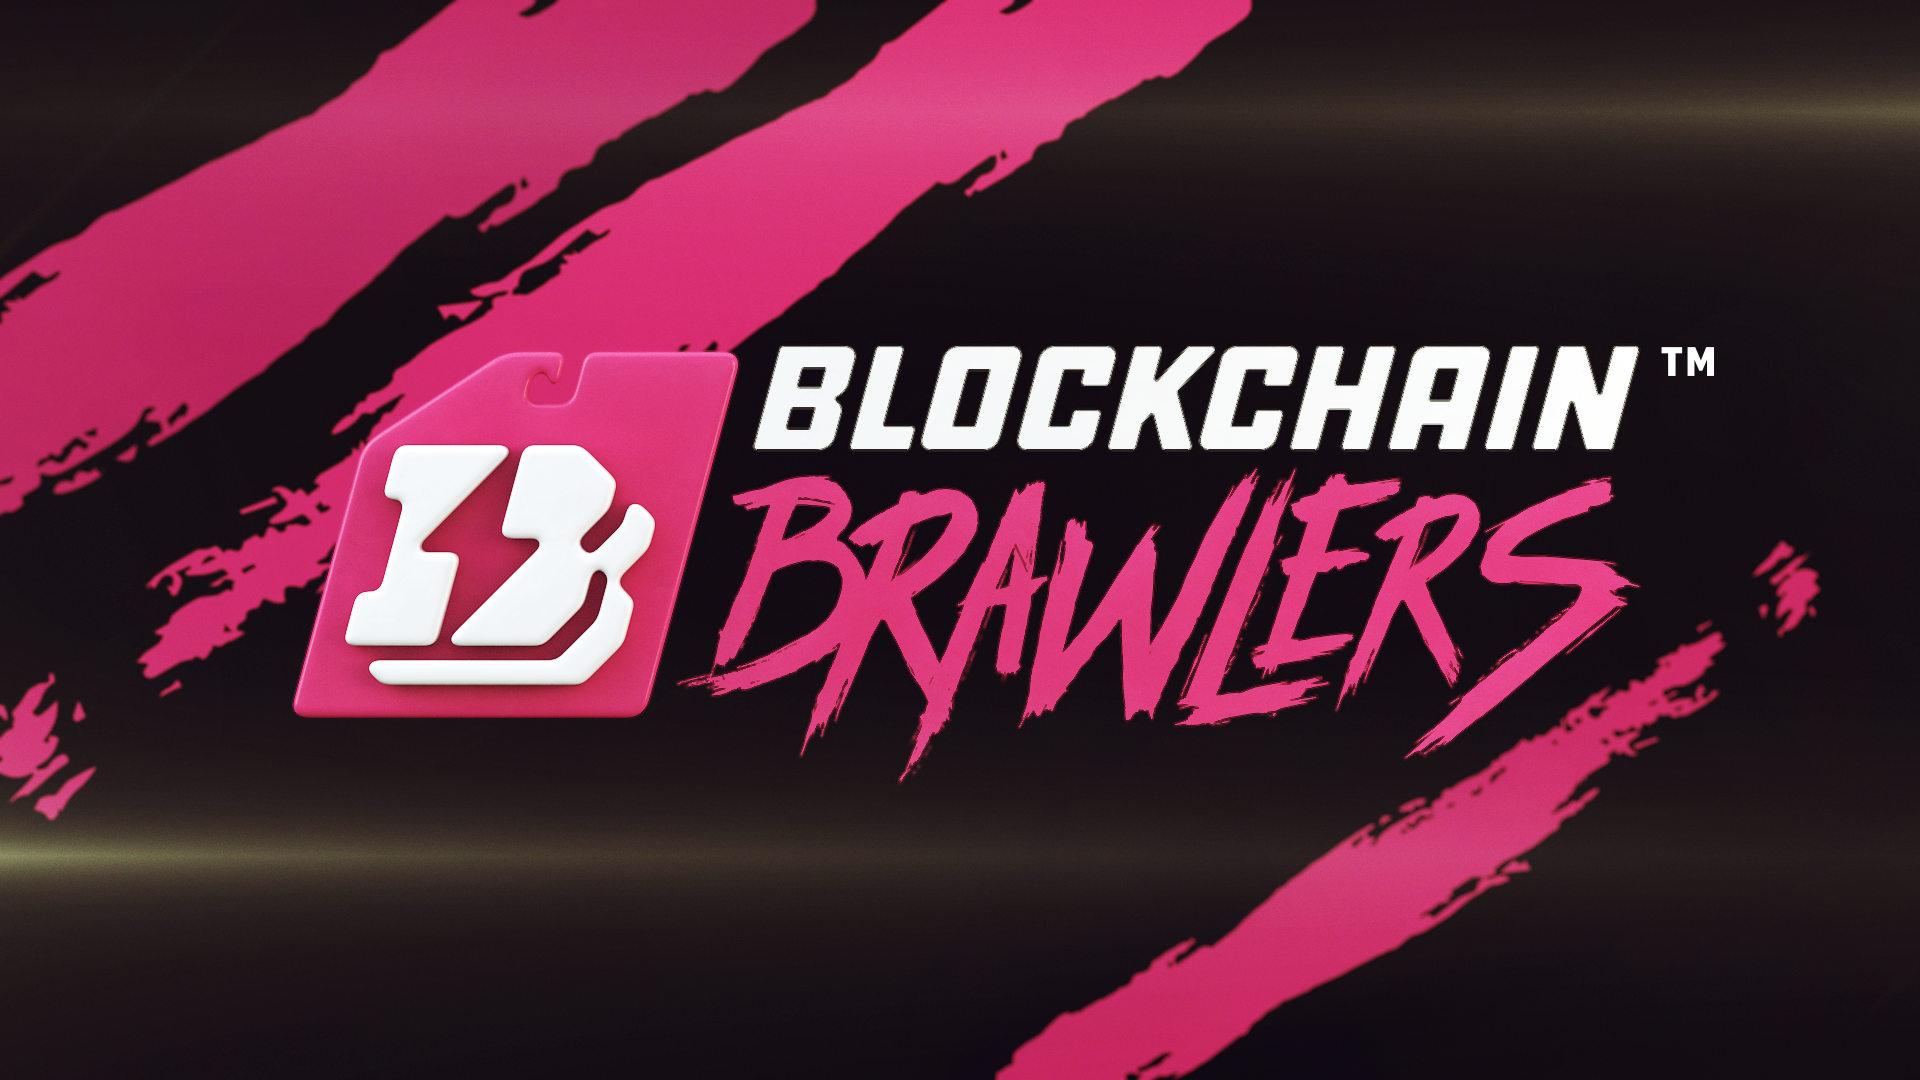 https://nftgames.net/wp-content/uploads/2023/03/Web3-fighting-game-Blockchain-Brawlers-reveals-details-of-highly-anticipated-event.png